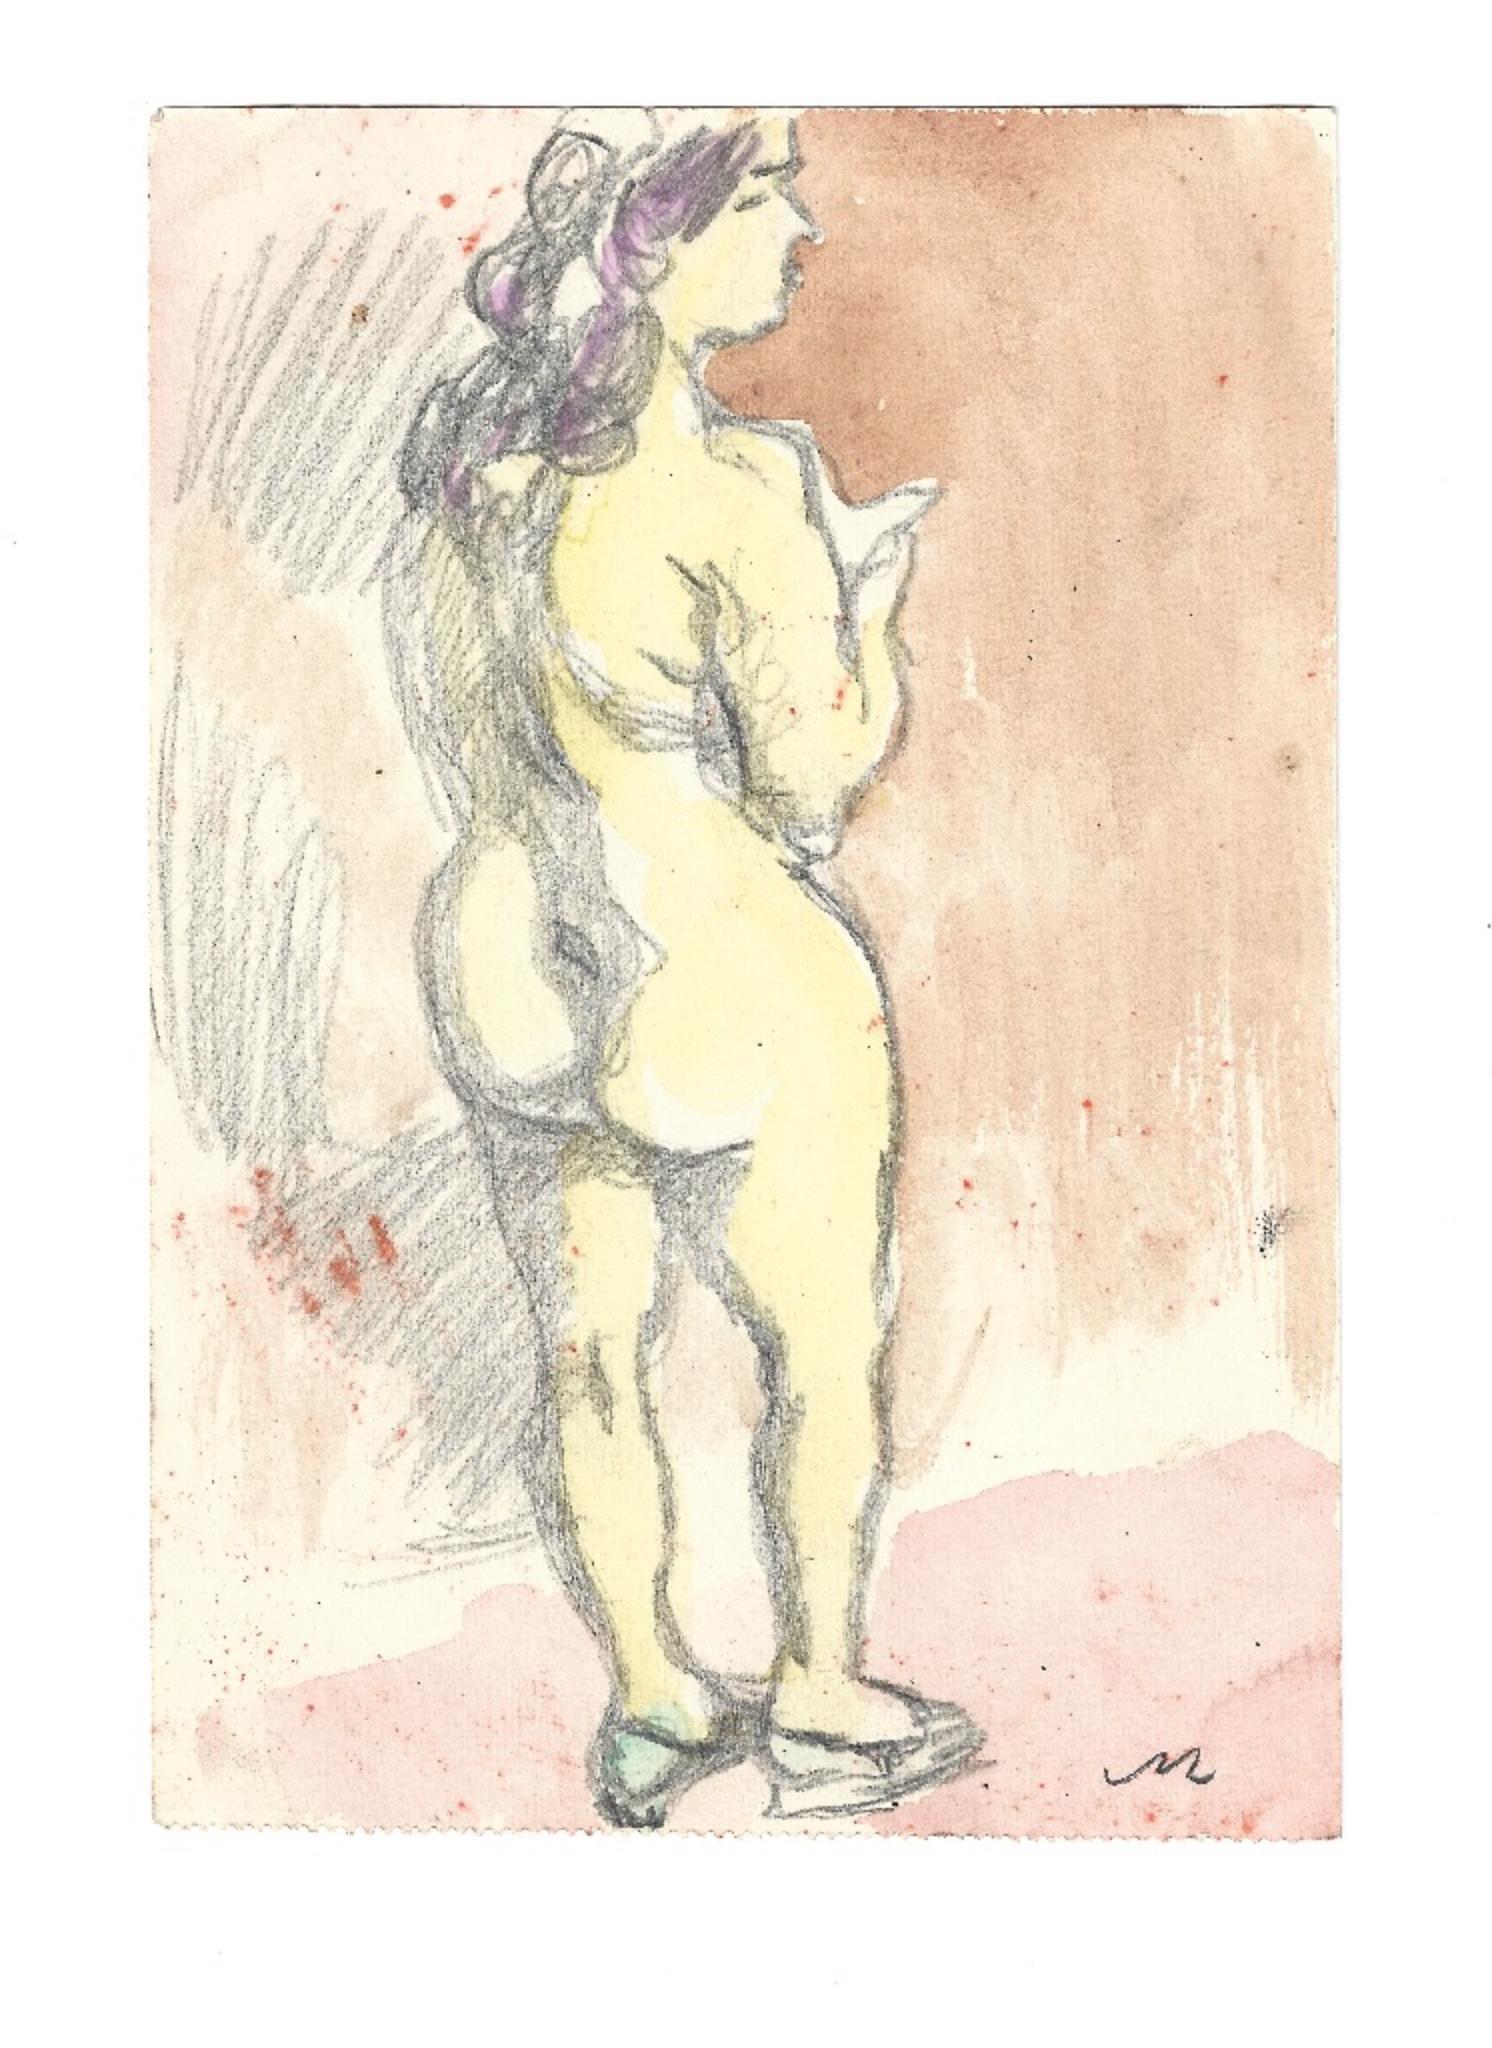 Nudo femminile (Female Nude) is an original watercolor drawing on paper, realized around the Seventies by the great Italian artist and journalist, Mino Maccari (Siena, 1898 - 1989).

Monogrammed "M" in pencil on the lower right margin. perfect